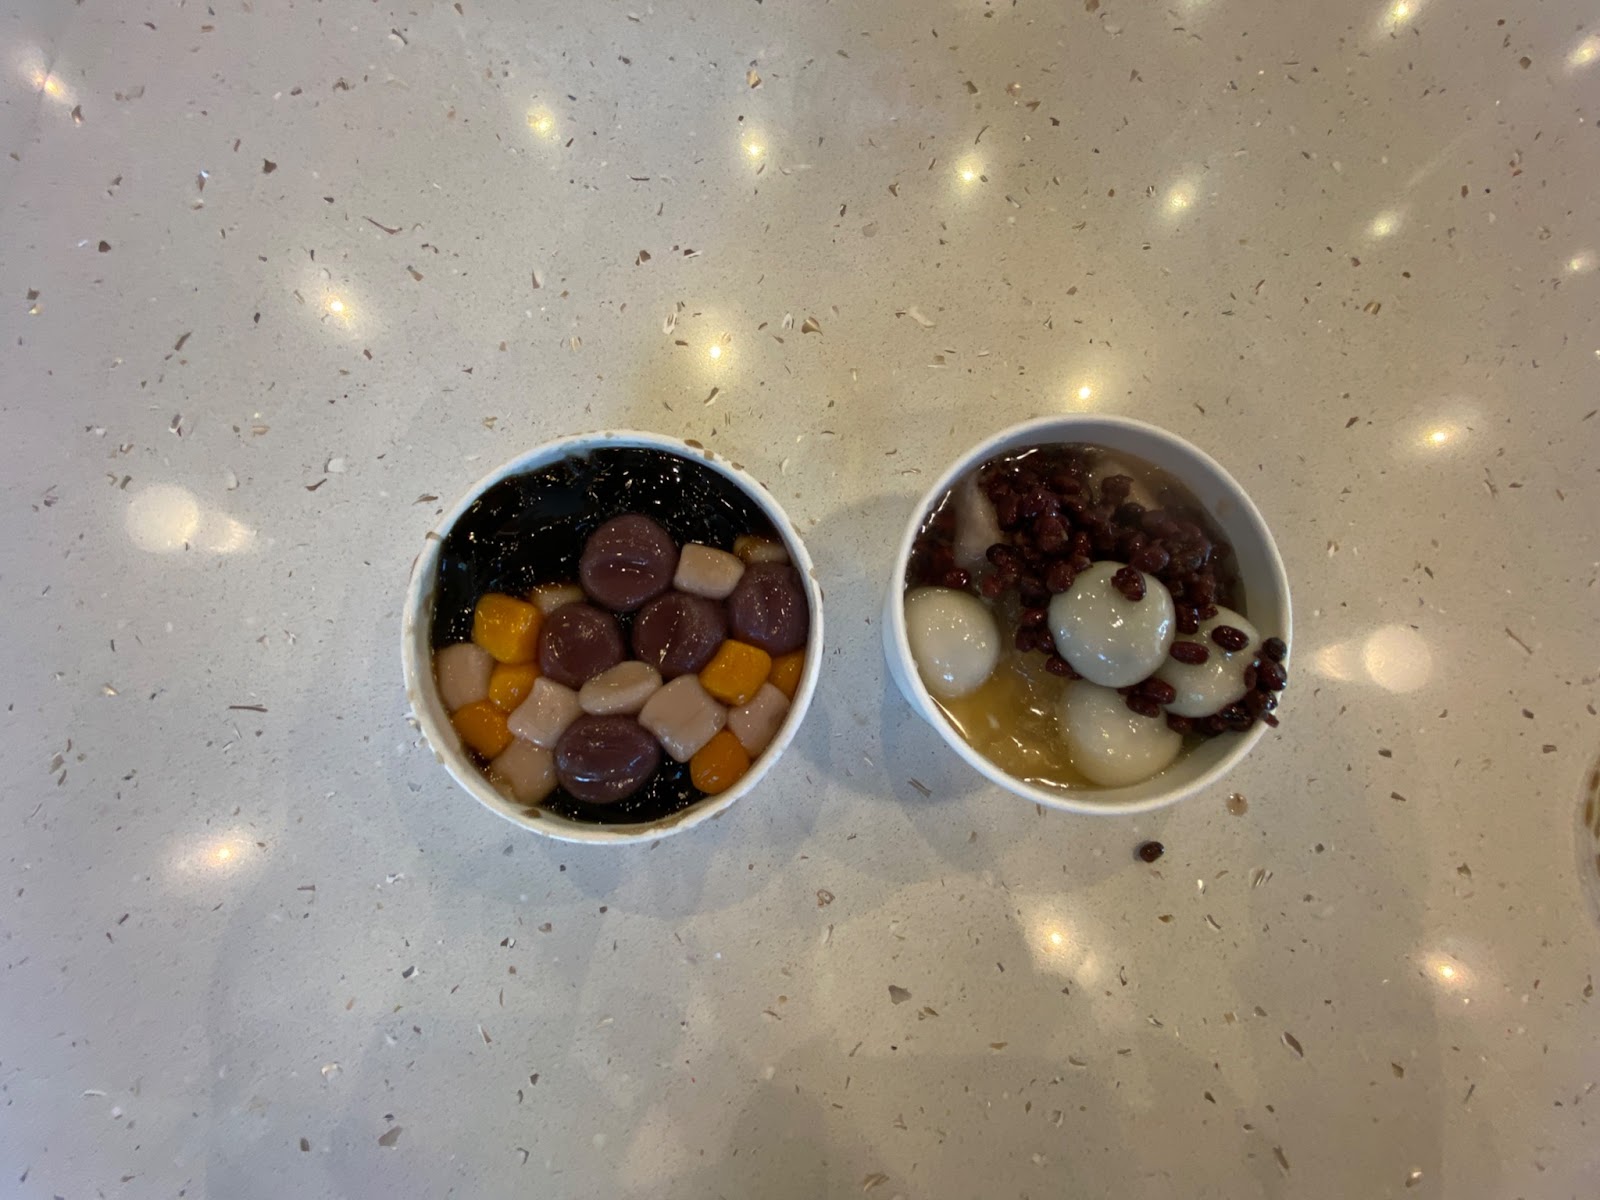 Left: Grass Jelly dessert with taro ball and taro rice ball toppings.
Right: Tofu pudding dessert with peanuts, sesame rice balls, red beans, and taro chunks.